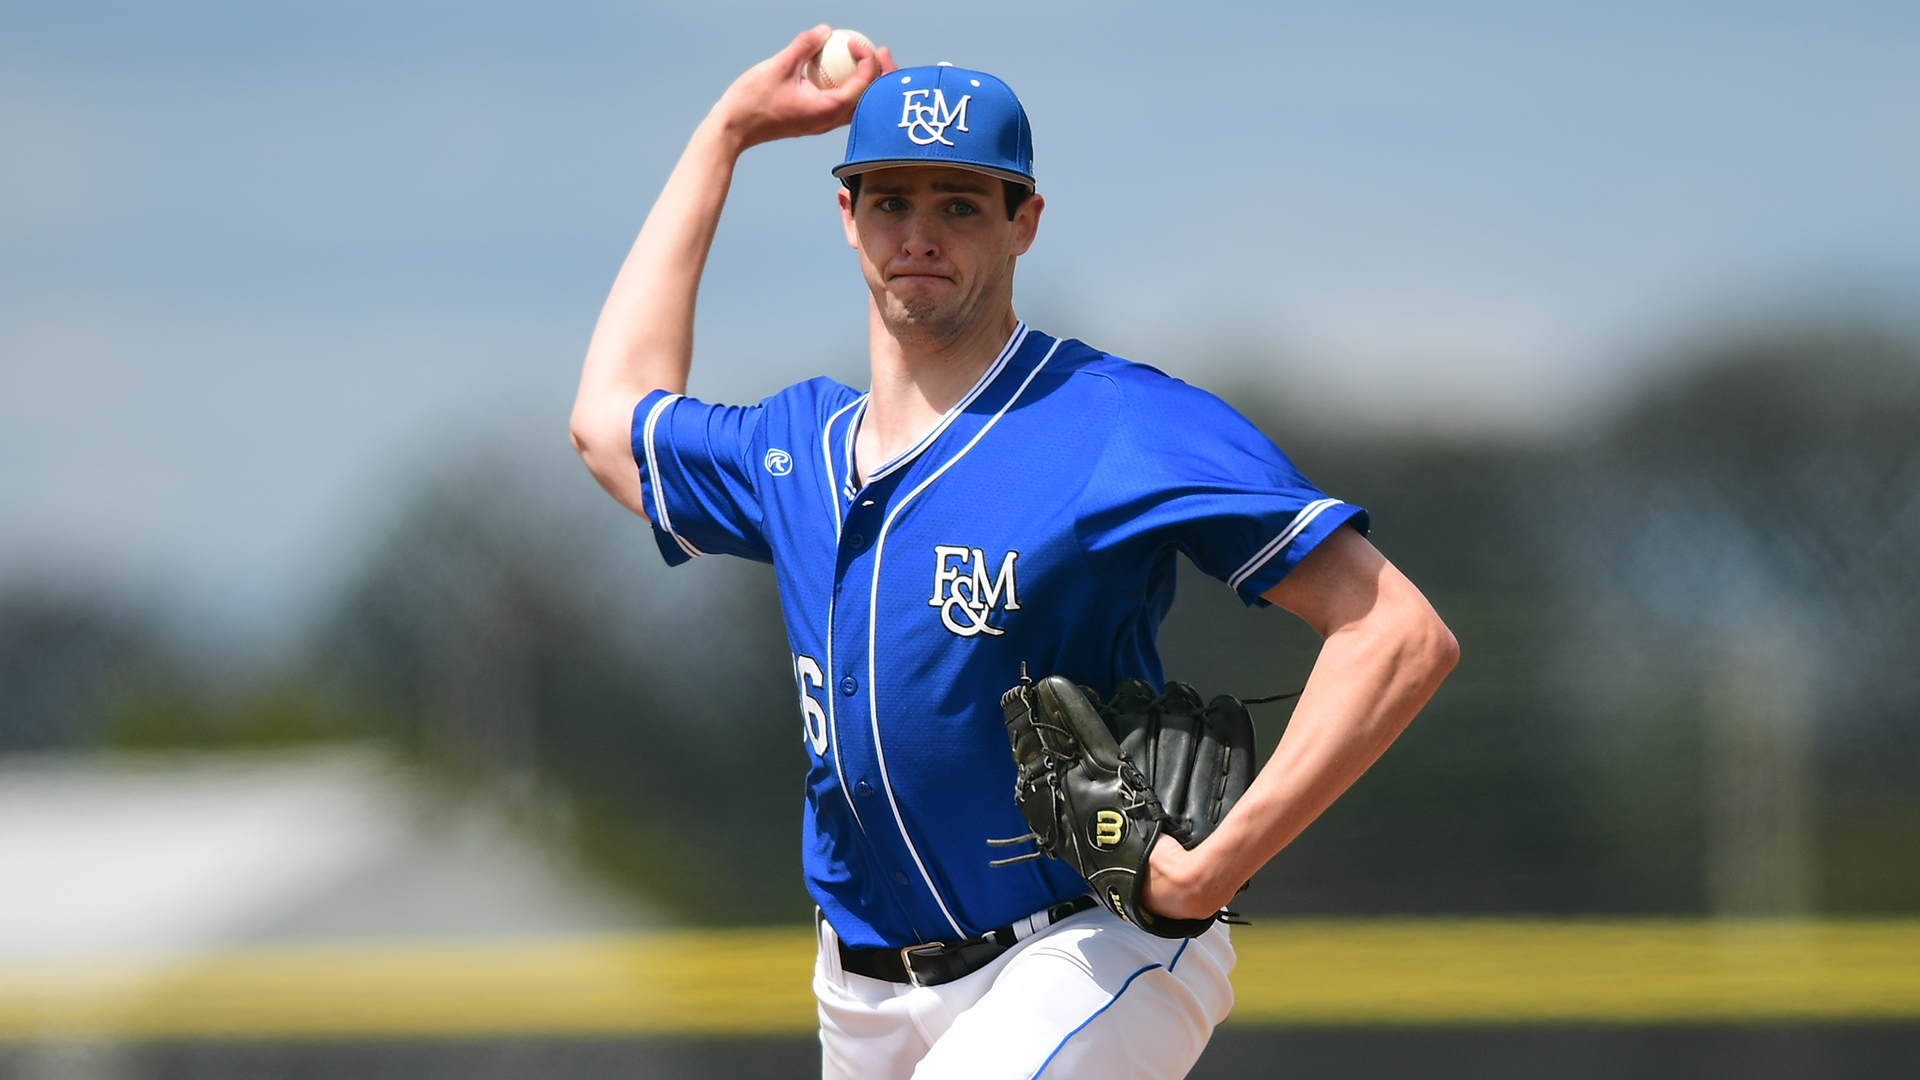 Kyle Roche, Franklin & Marshall, Pitcher of the Year